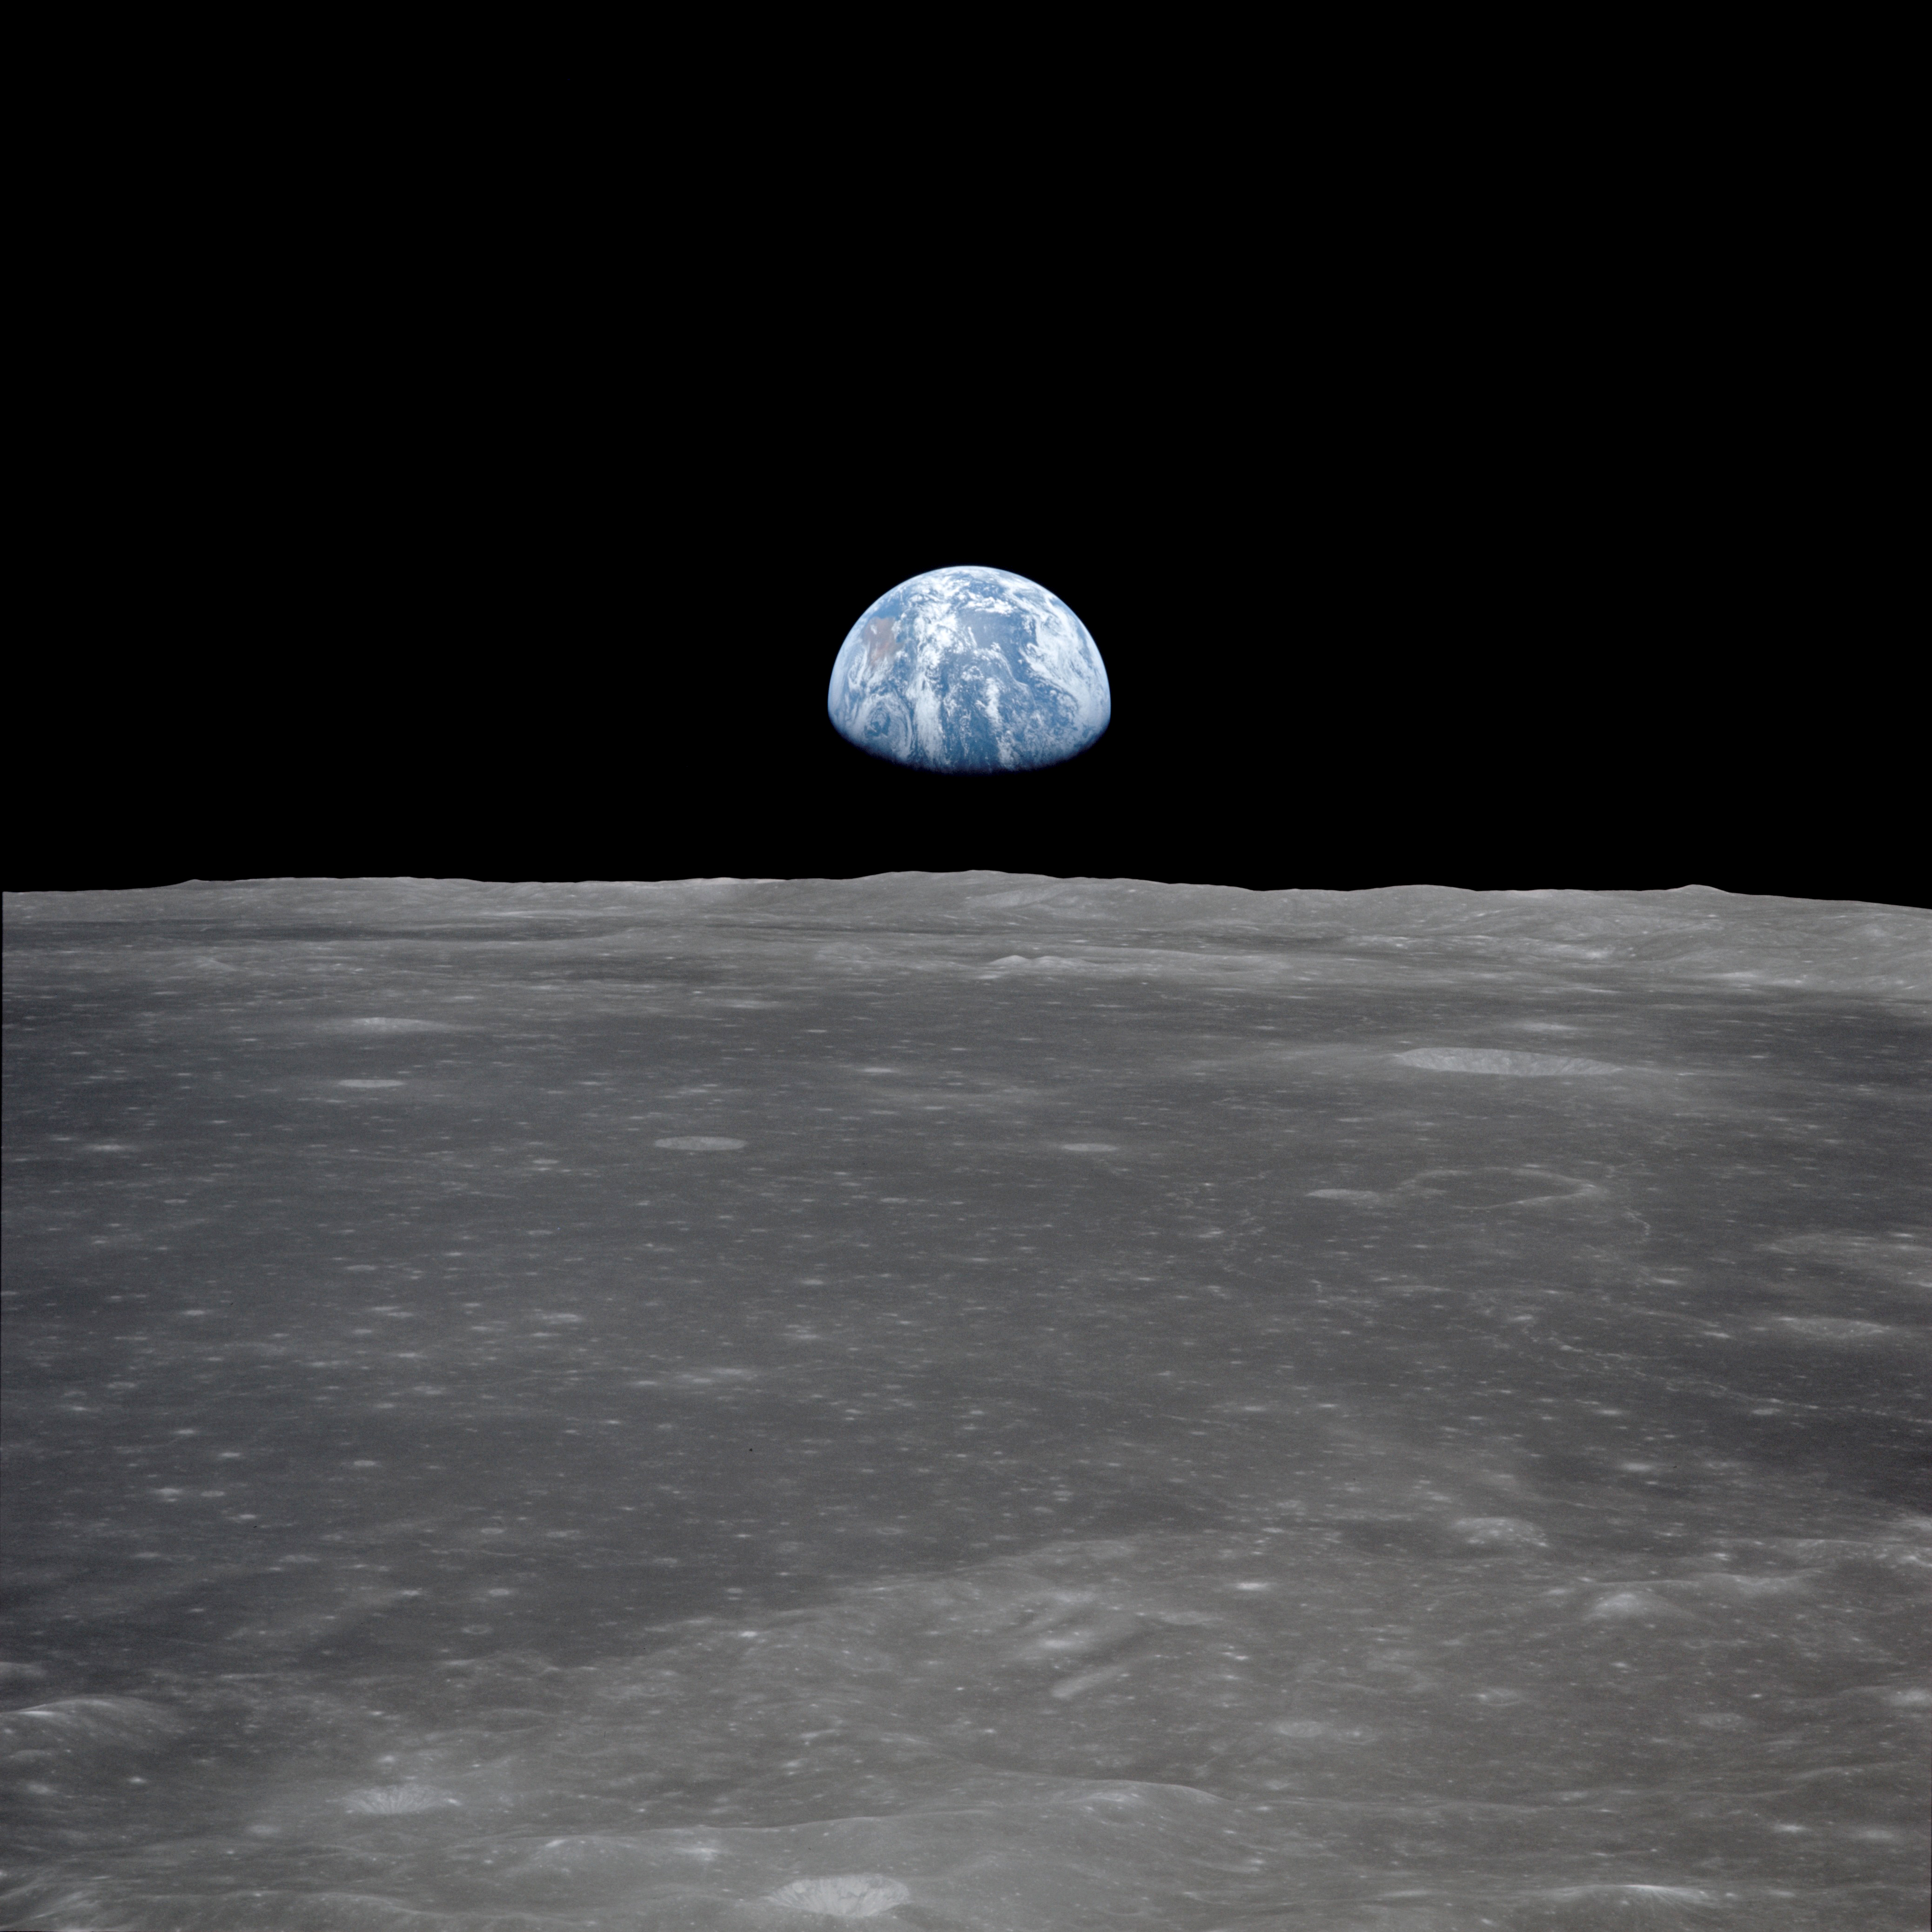 (July 1969) --- This view from the Apollo 11 spacecraft shows the Earth rising above the moon’s horizon. The lunar terrain pictured is in the area of Smyth’s Sea on the nearside